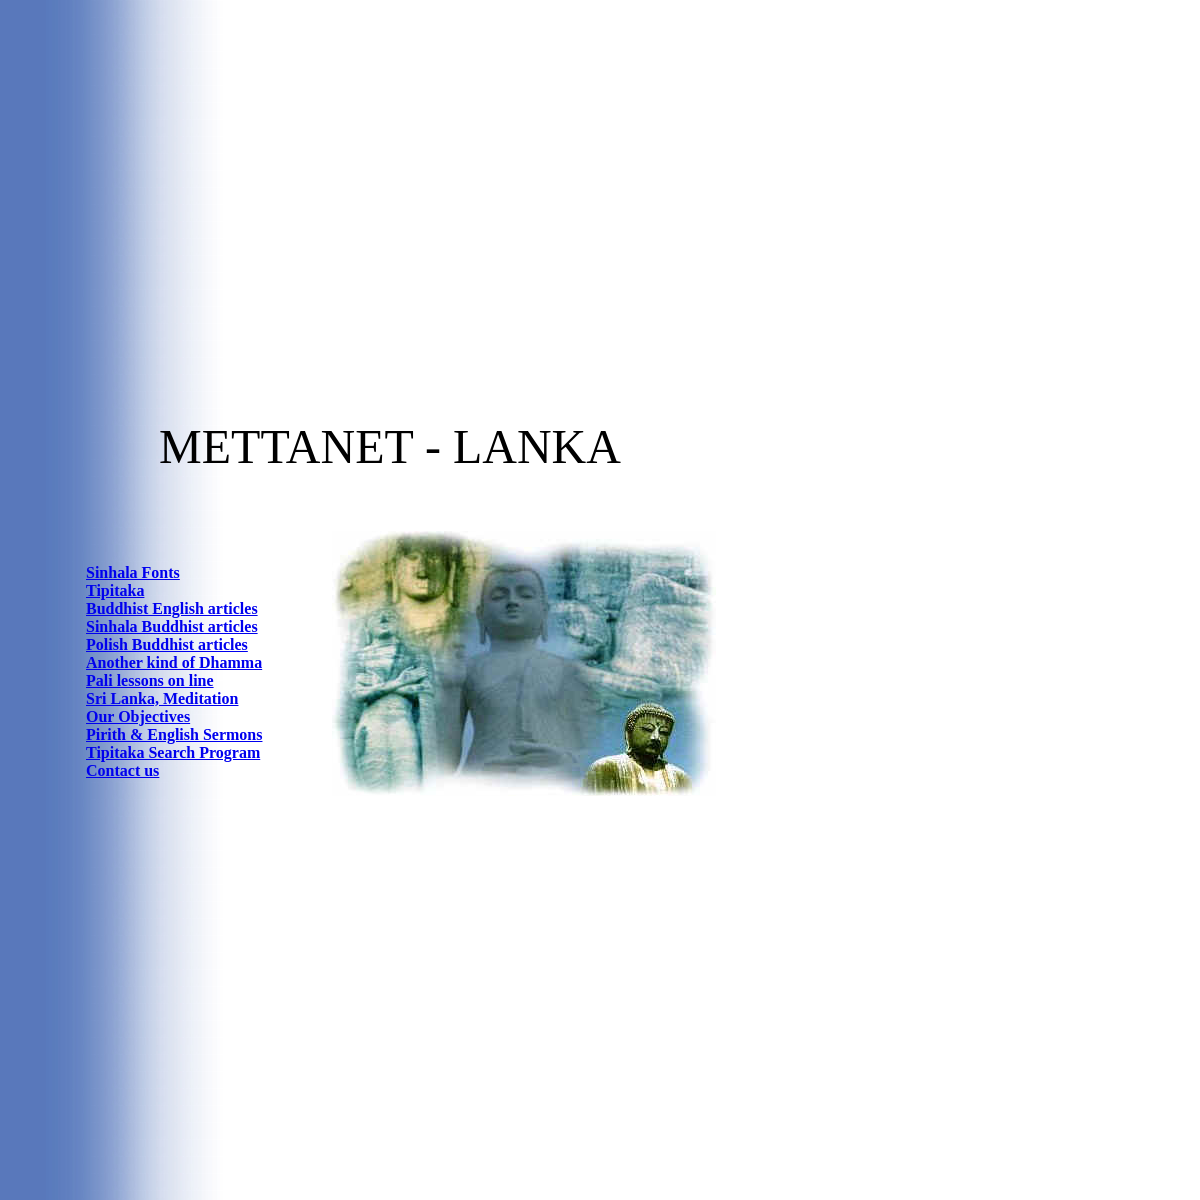 A complete backup of metta.lk